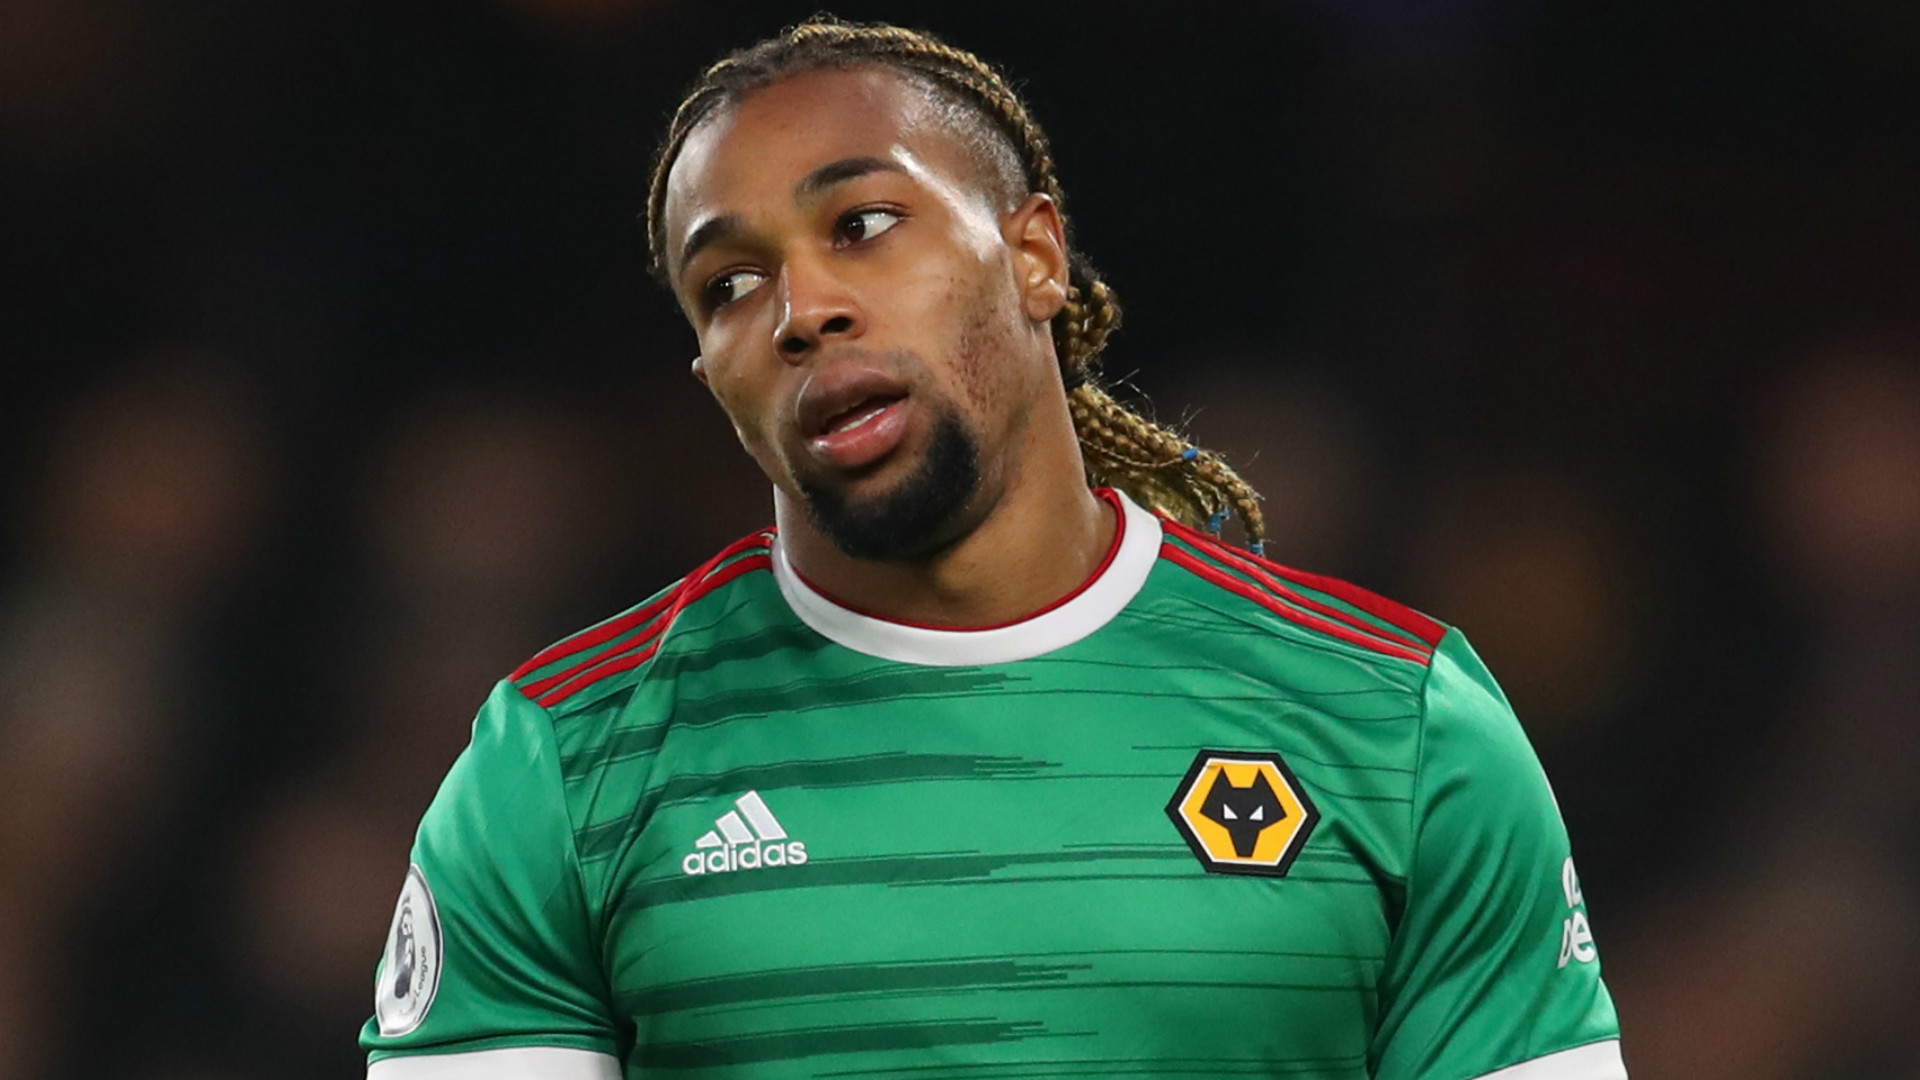 â€˜Traore not ready to start for Liverpoolâ€™ â€“ Wolves winger isnâ€™t â€˜finished articleâ€™, admits Nicol